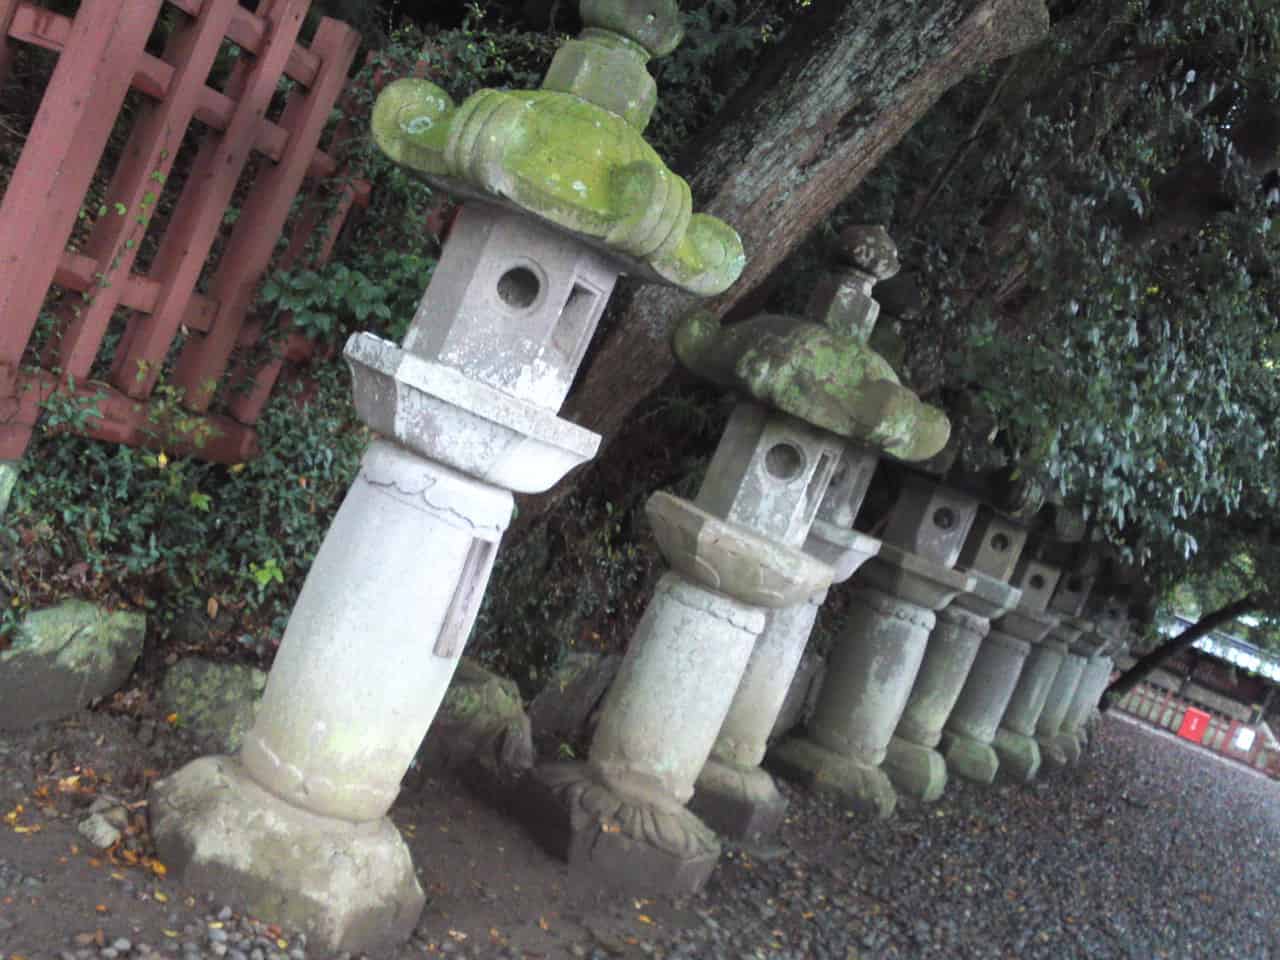 there are stone lanterns lined along with the street